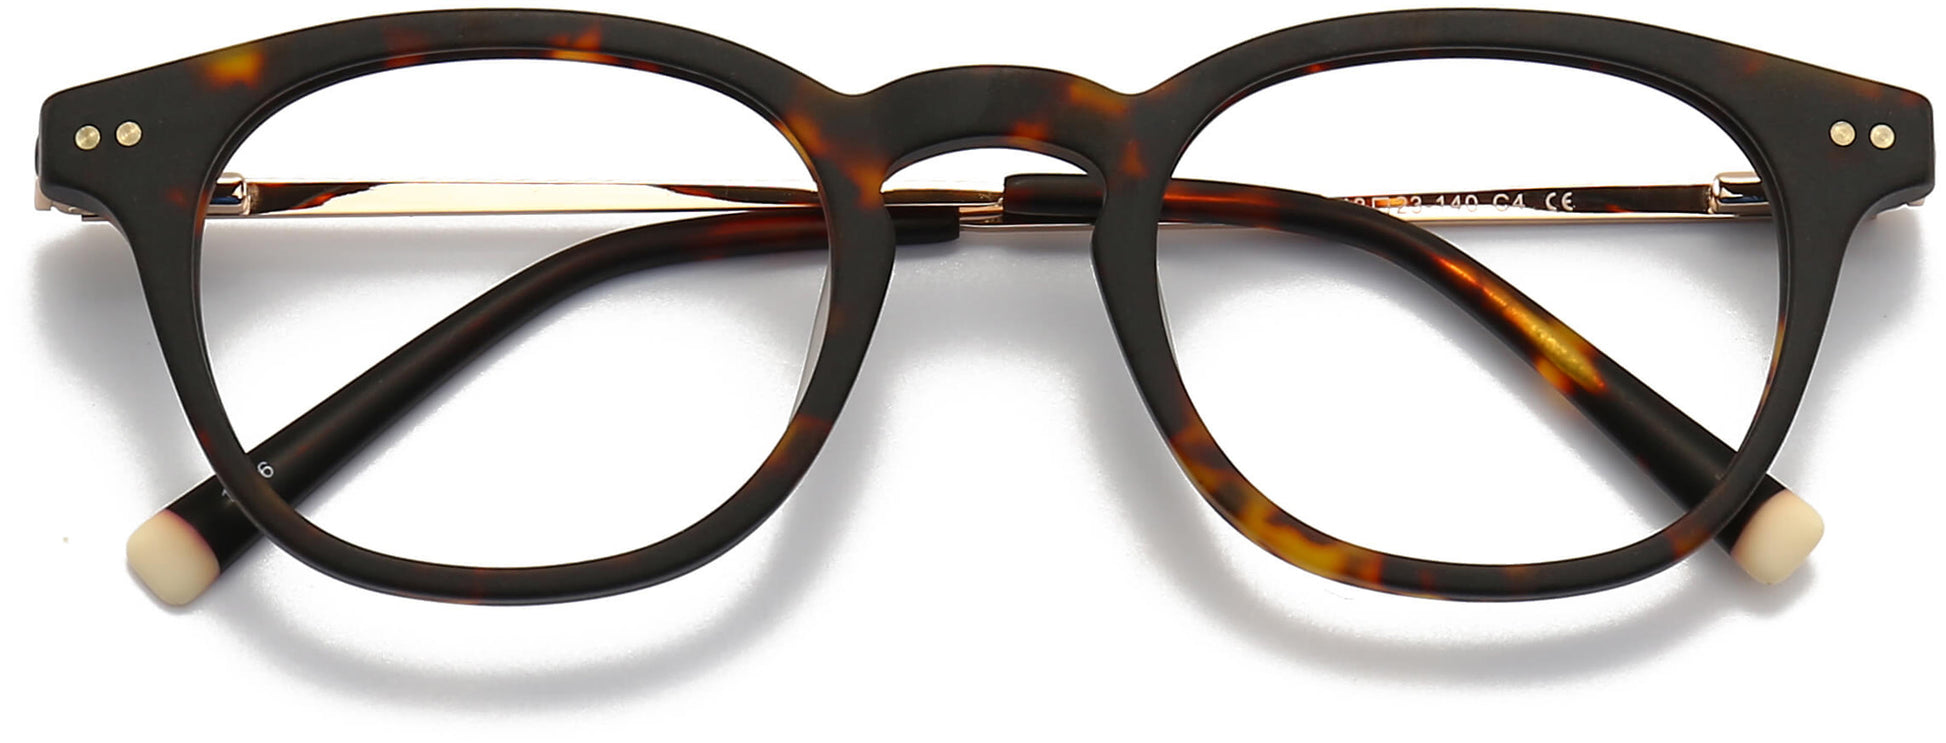 Maximo Round Tortoise Eyeglasses from ANRRI, closed view